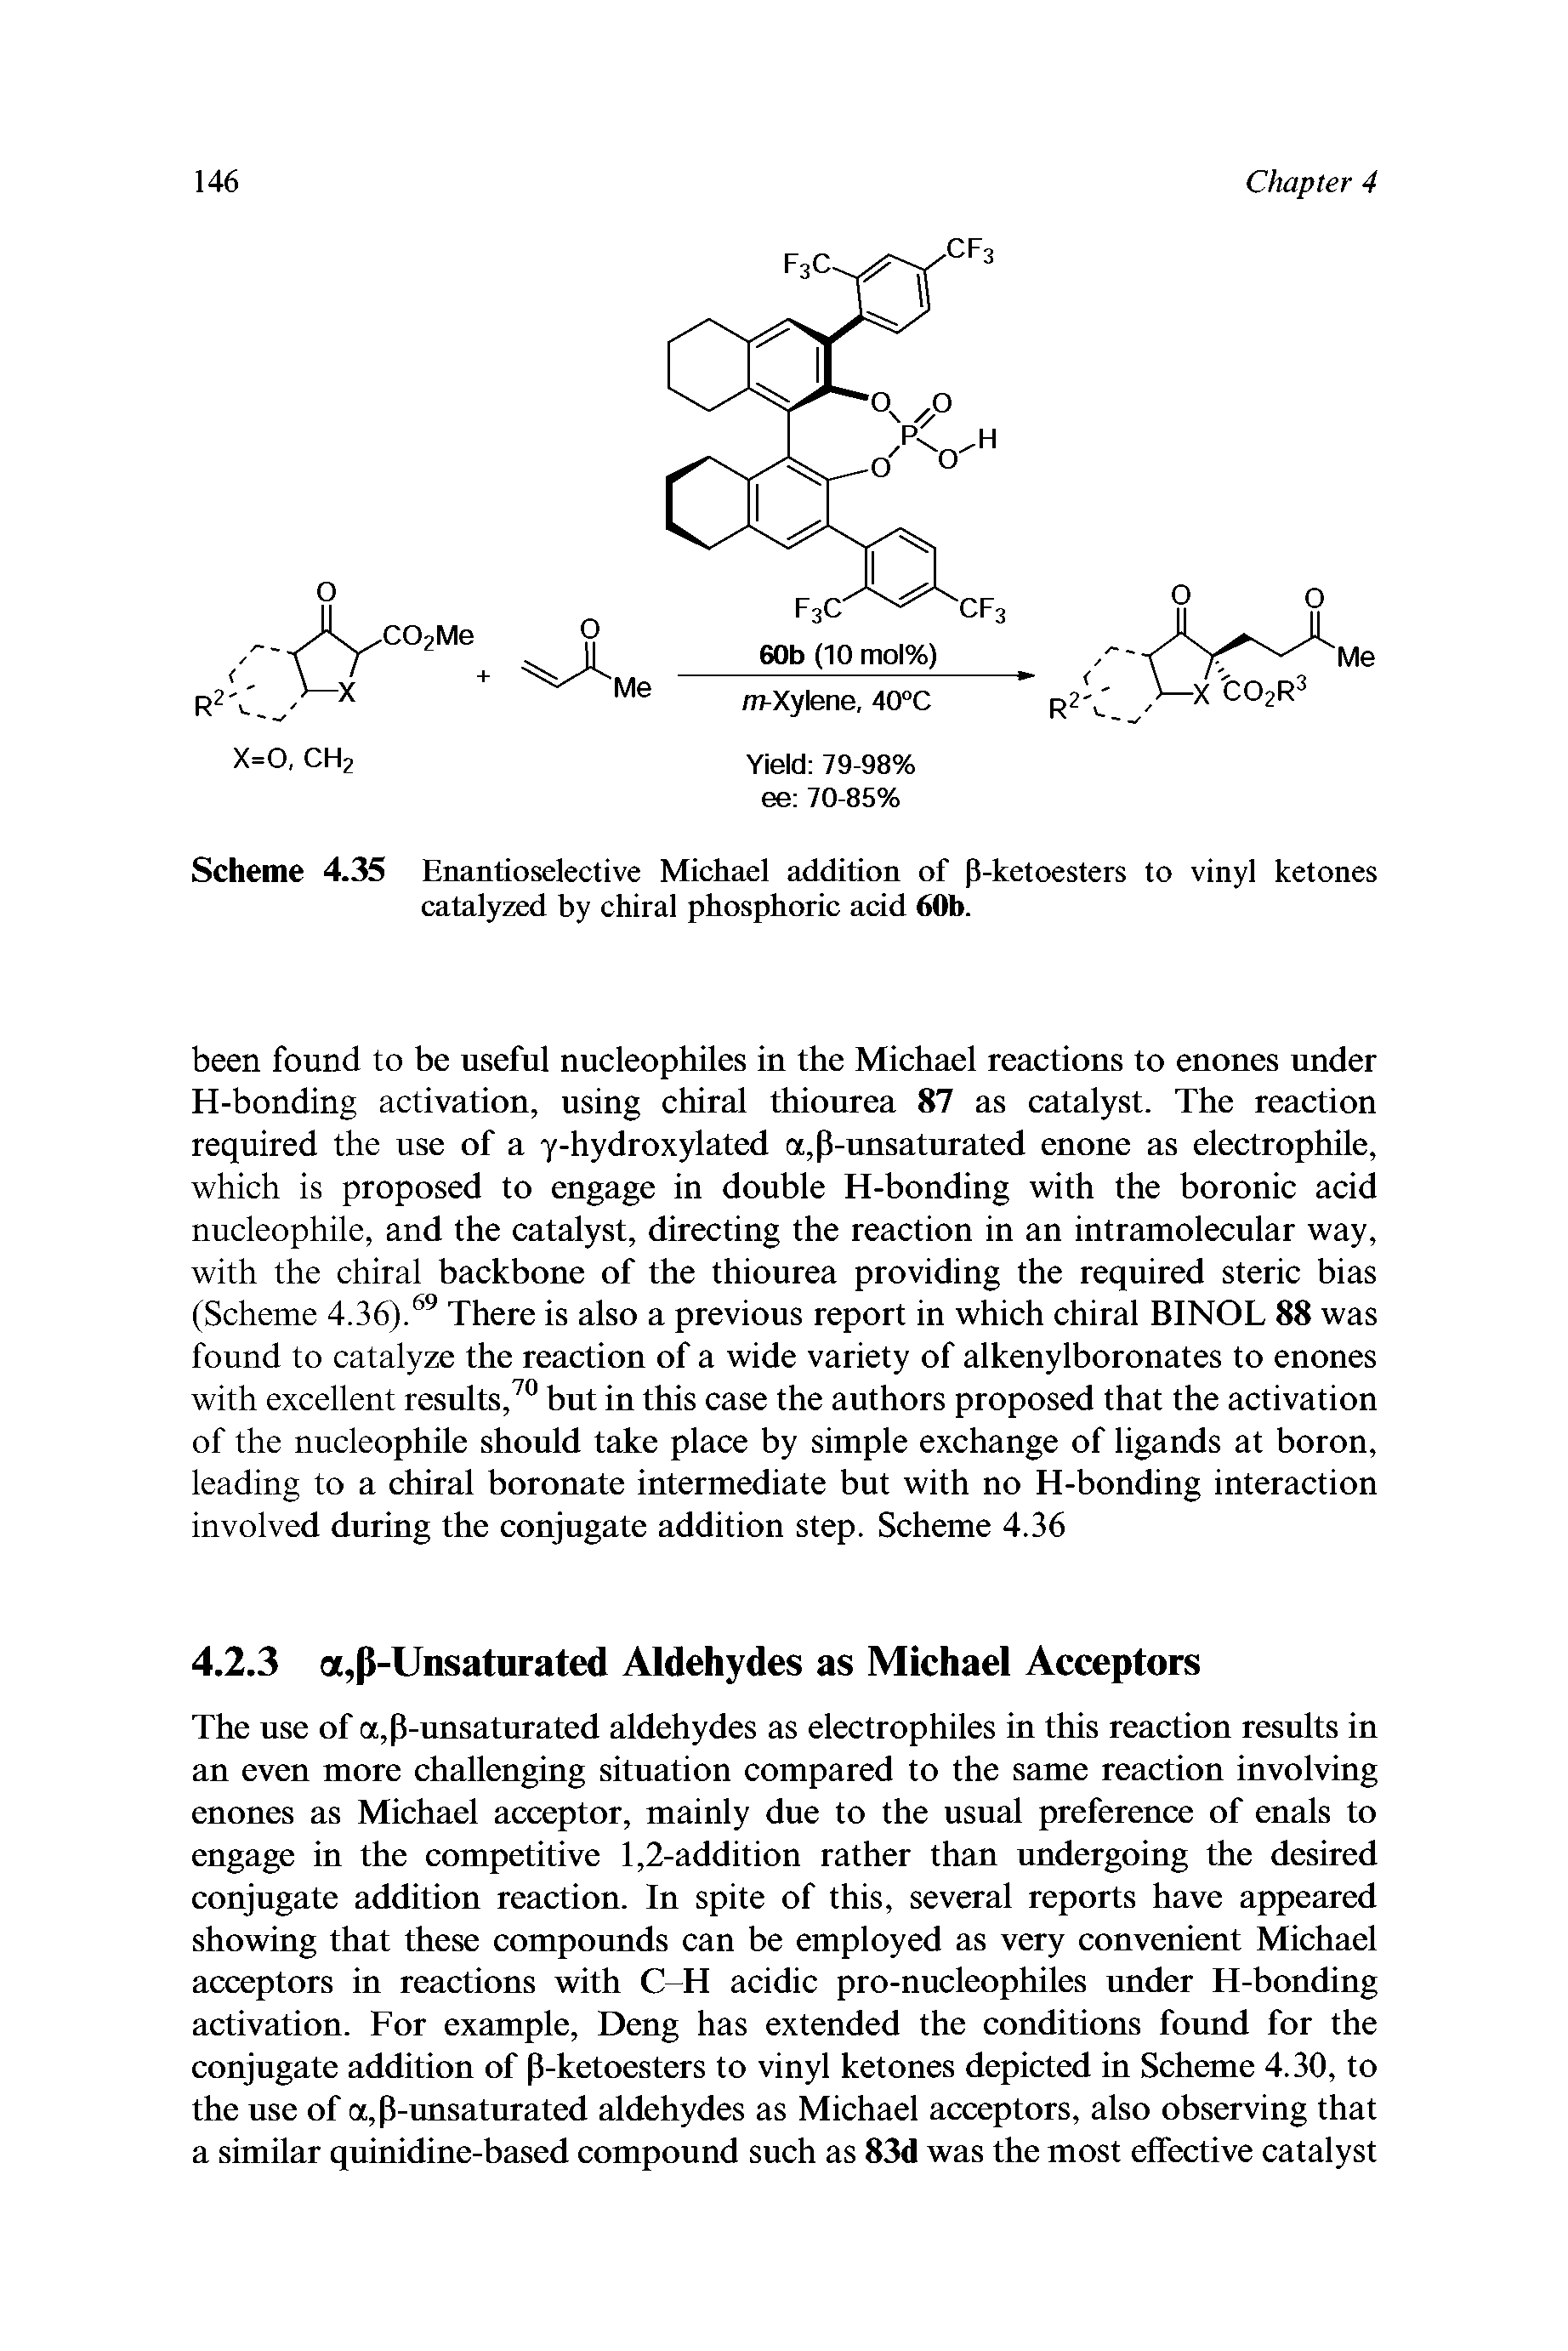 Scheme 4.35 Enantioselective Michael addition of p-ketoesters to vinyl ketones catalyzed by chiral phosphoric add 60b.